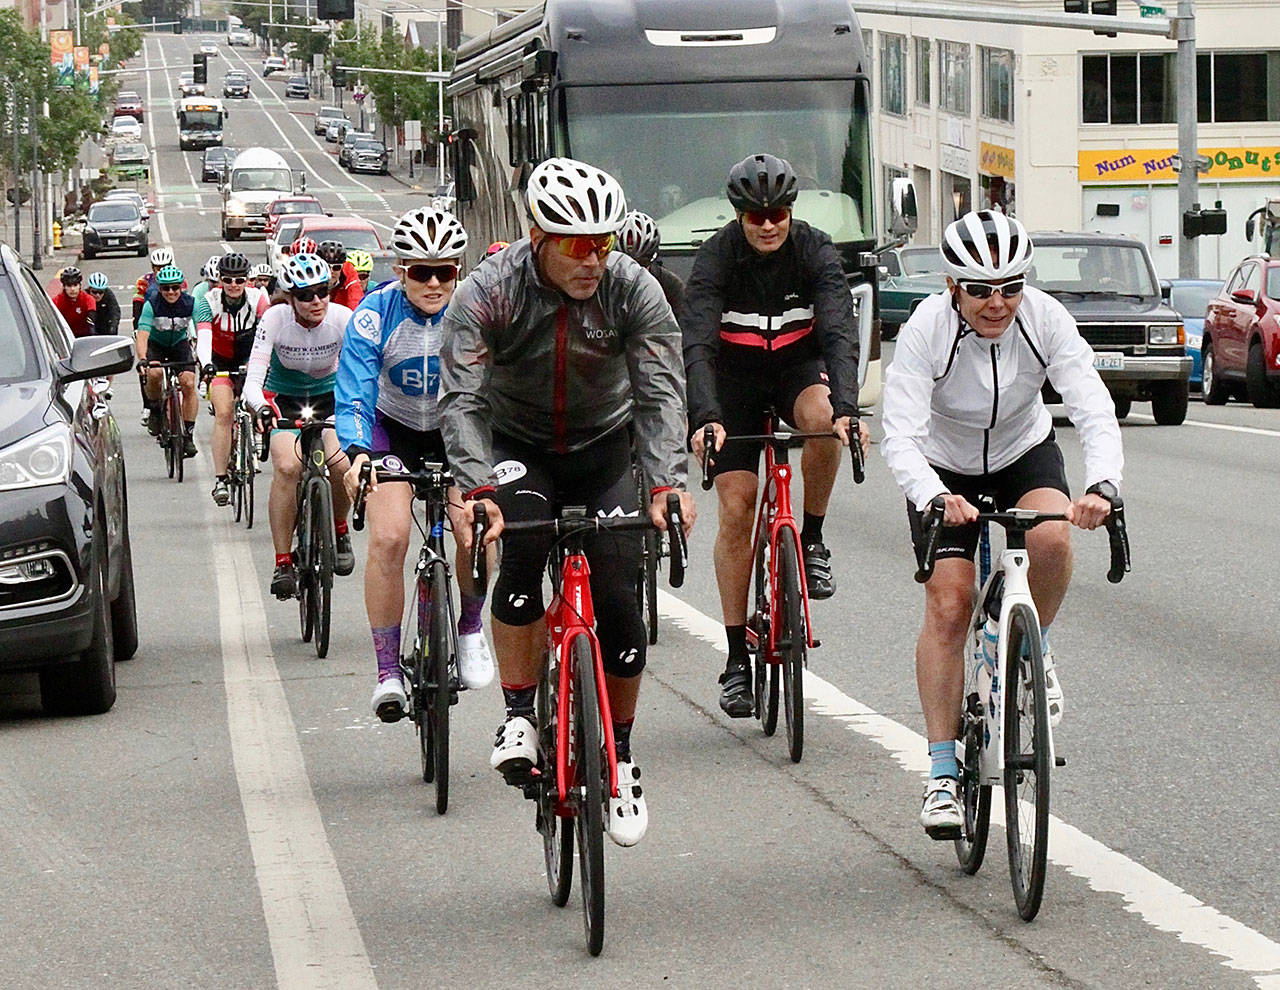 About 30 hardy cyclists from the Victoria area came across on the early Coho ferry last year to ride up to the top of Hurricane Ridge for the Ride the Hurricane event. (Peninsula Daily News file)